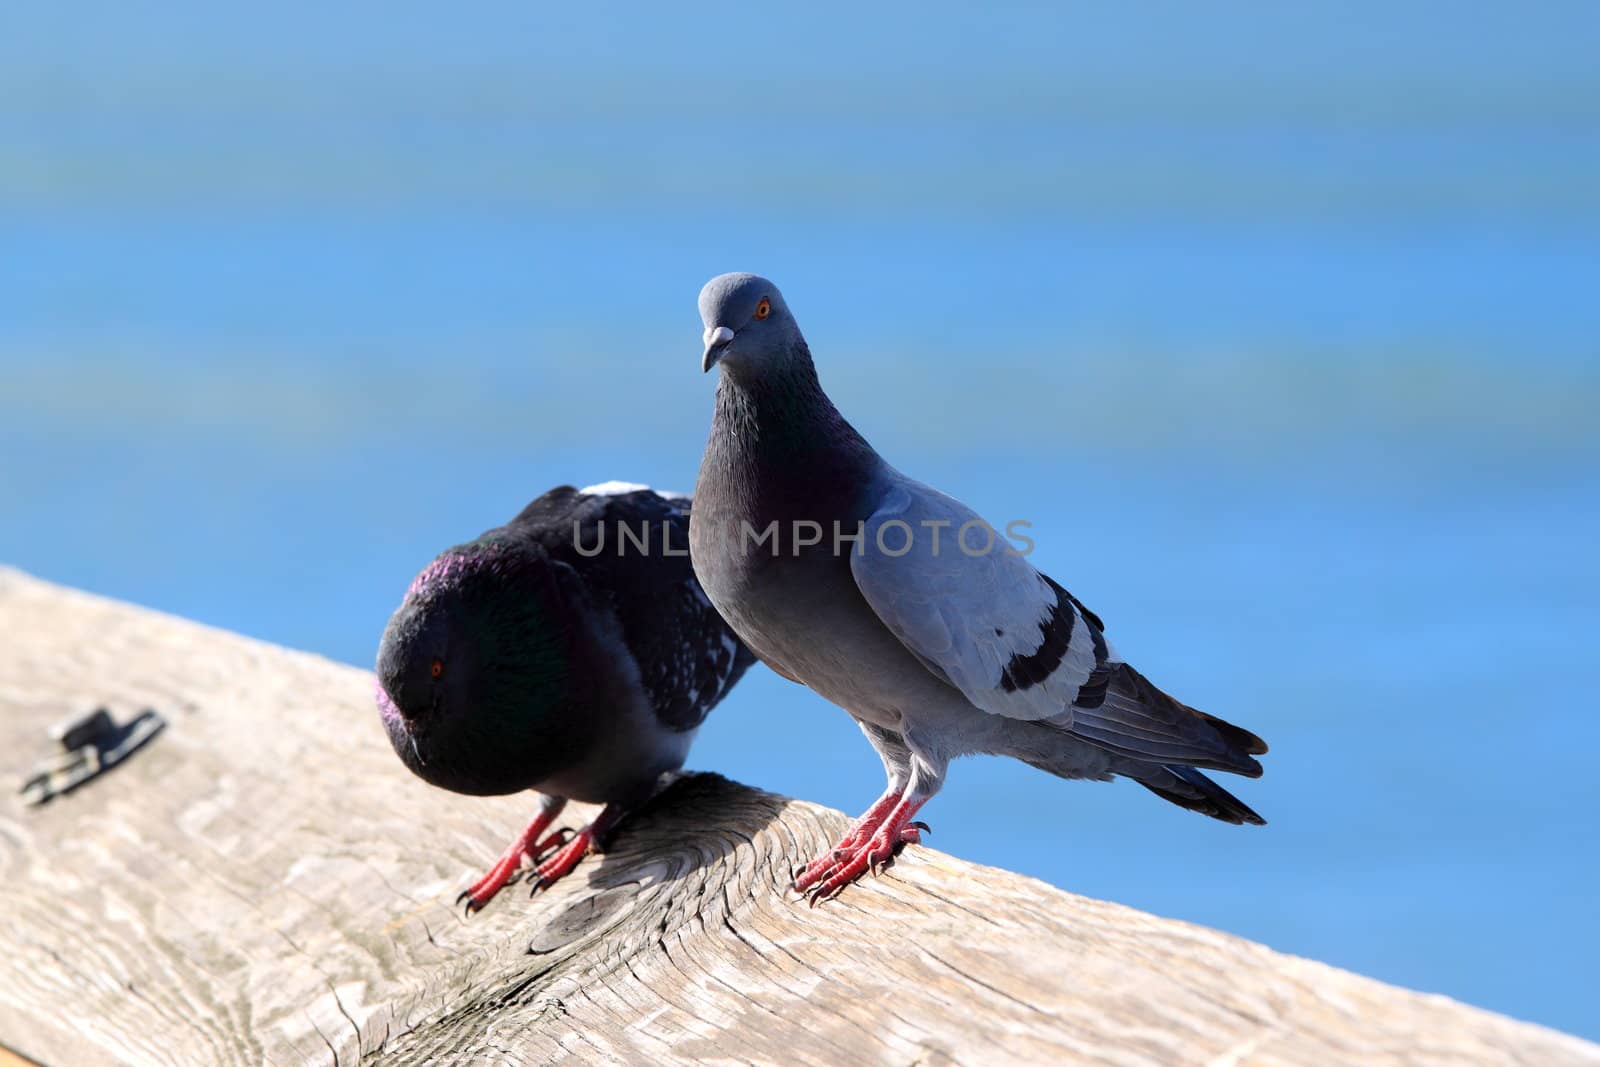 Pigeon sitting on a wood plank with water in the background